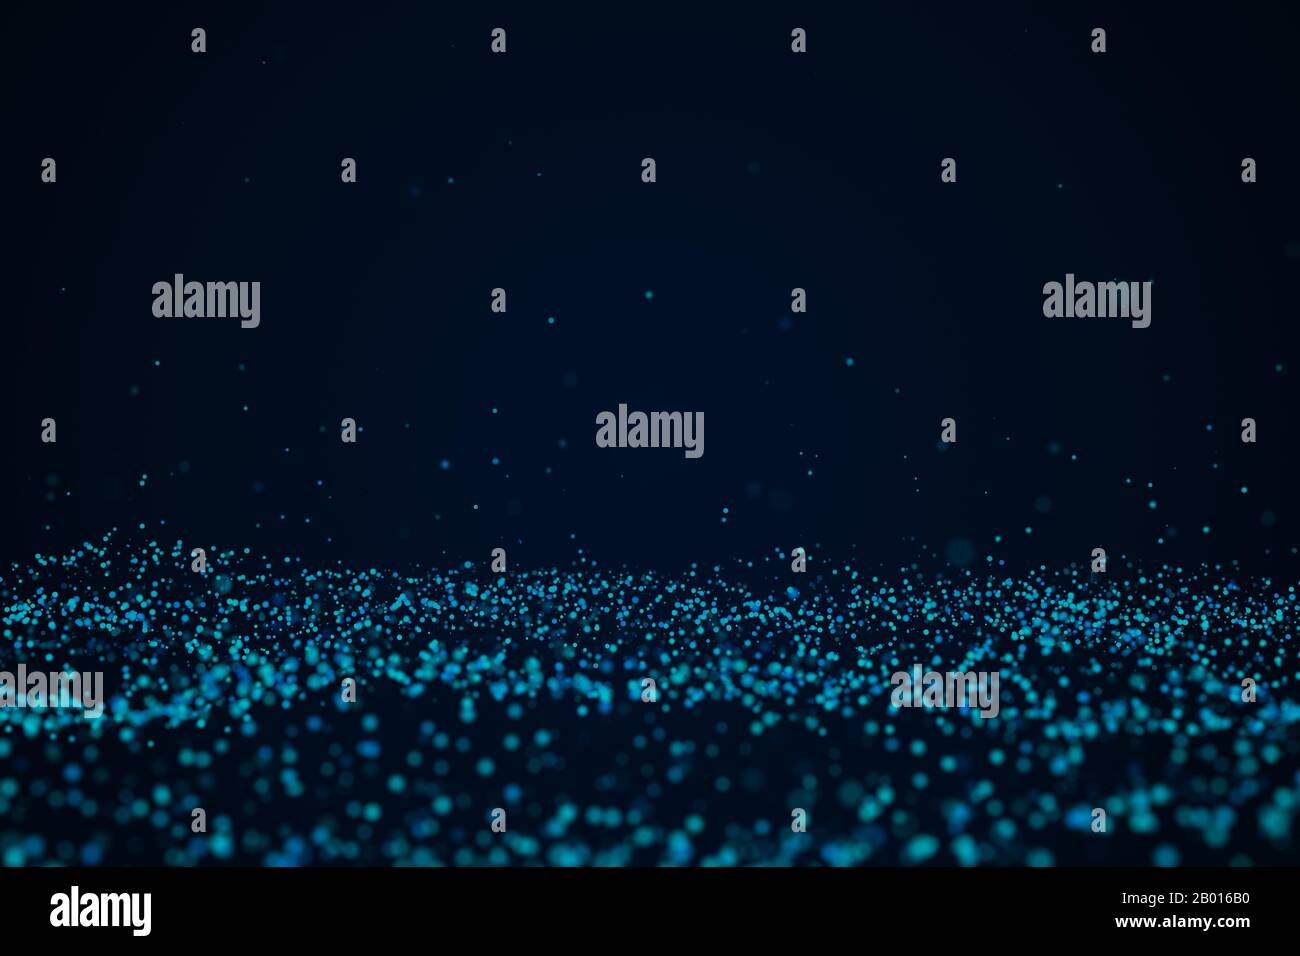 Future digital technology and big data visualization, abstract background illustration with glowing particles in cyberspace for science and analytics, Stock Photo